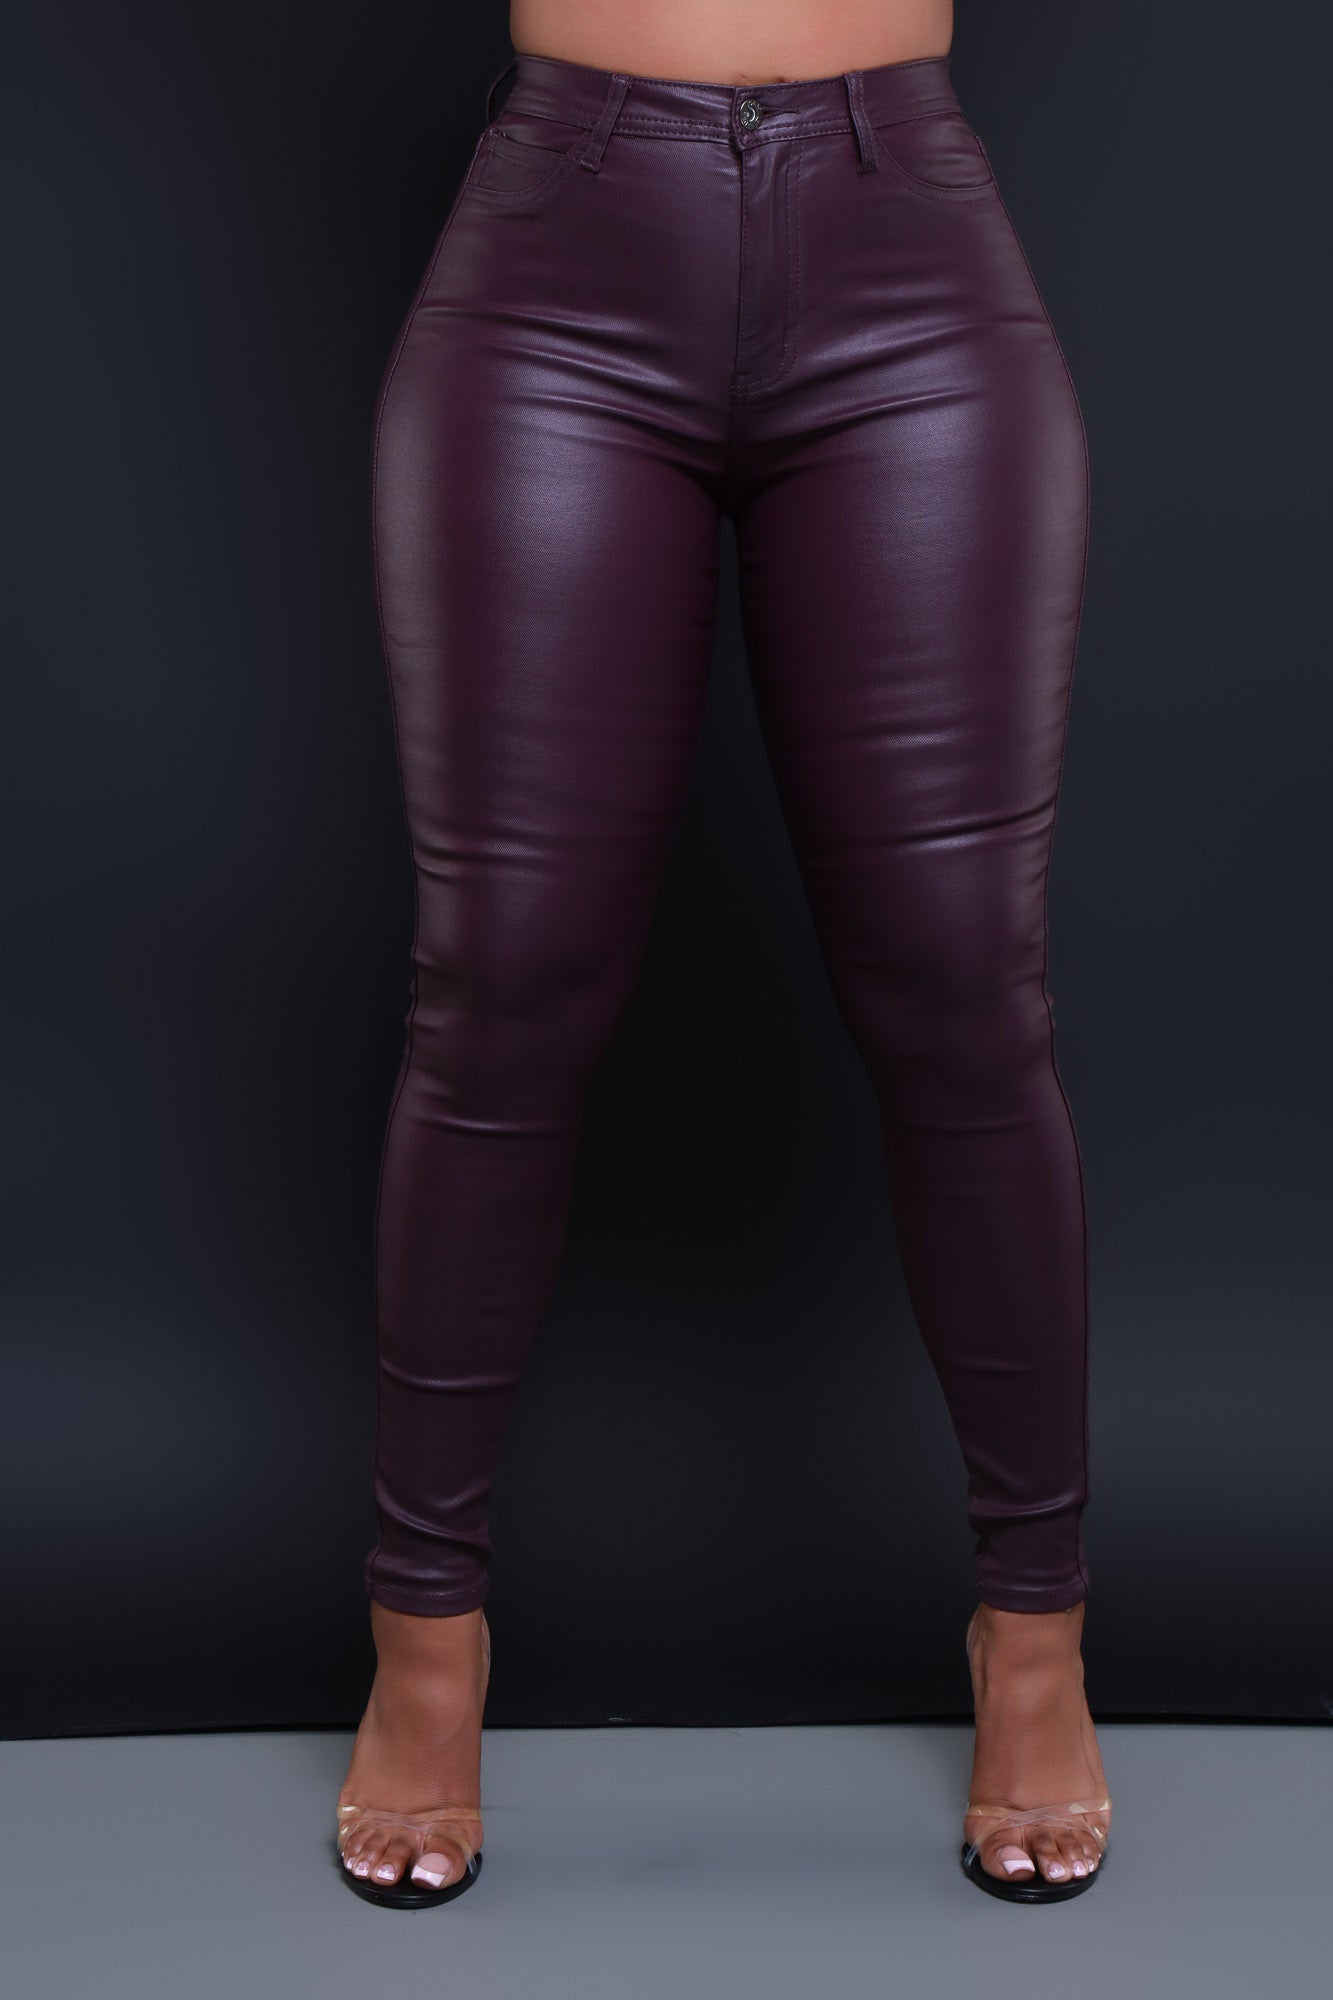 Distressed Brown Faux Leather Leggings